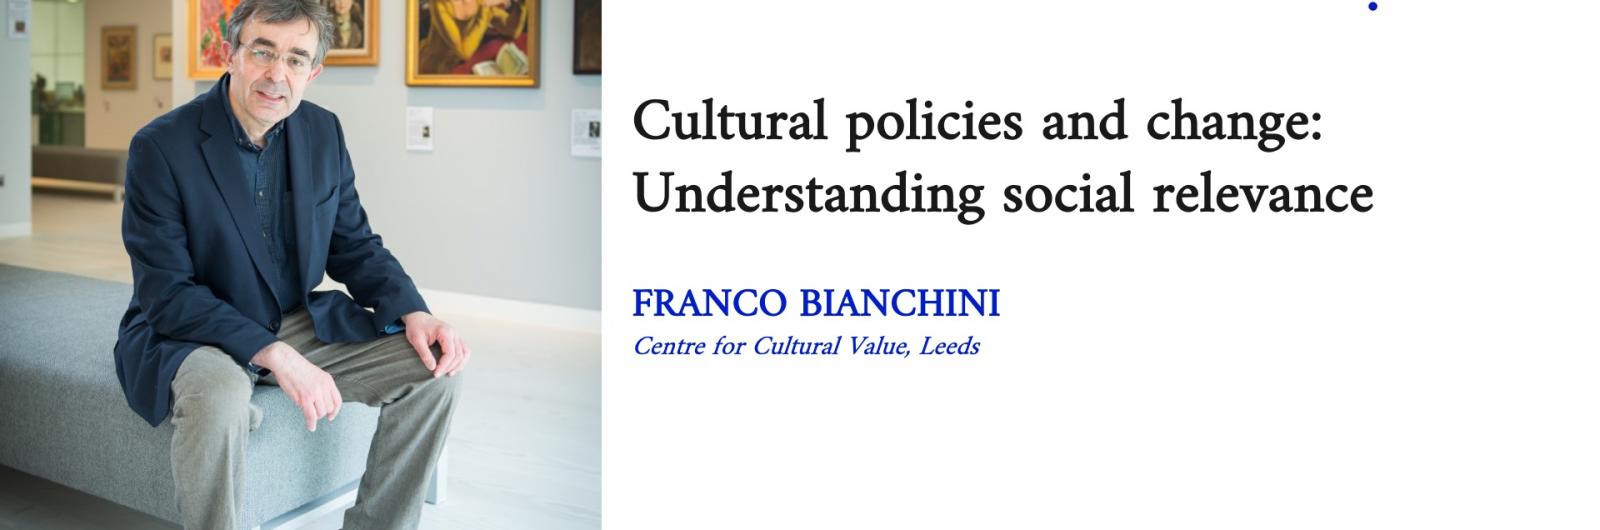 Cultural policies and change